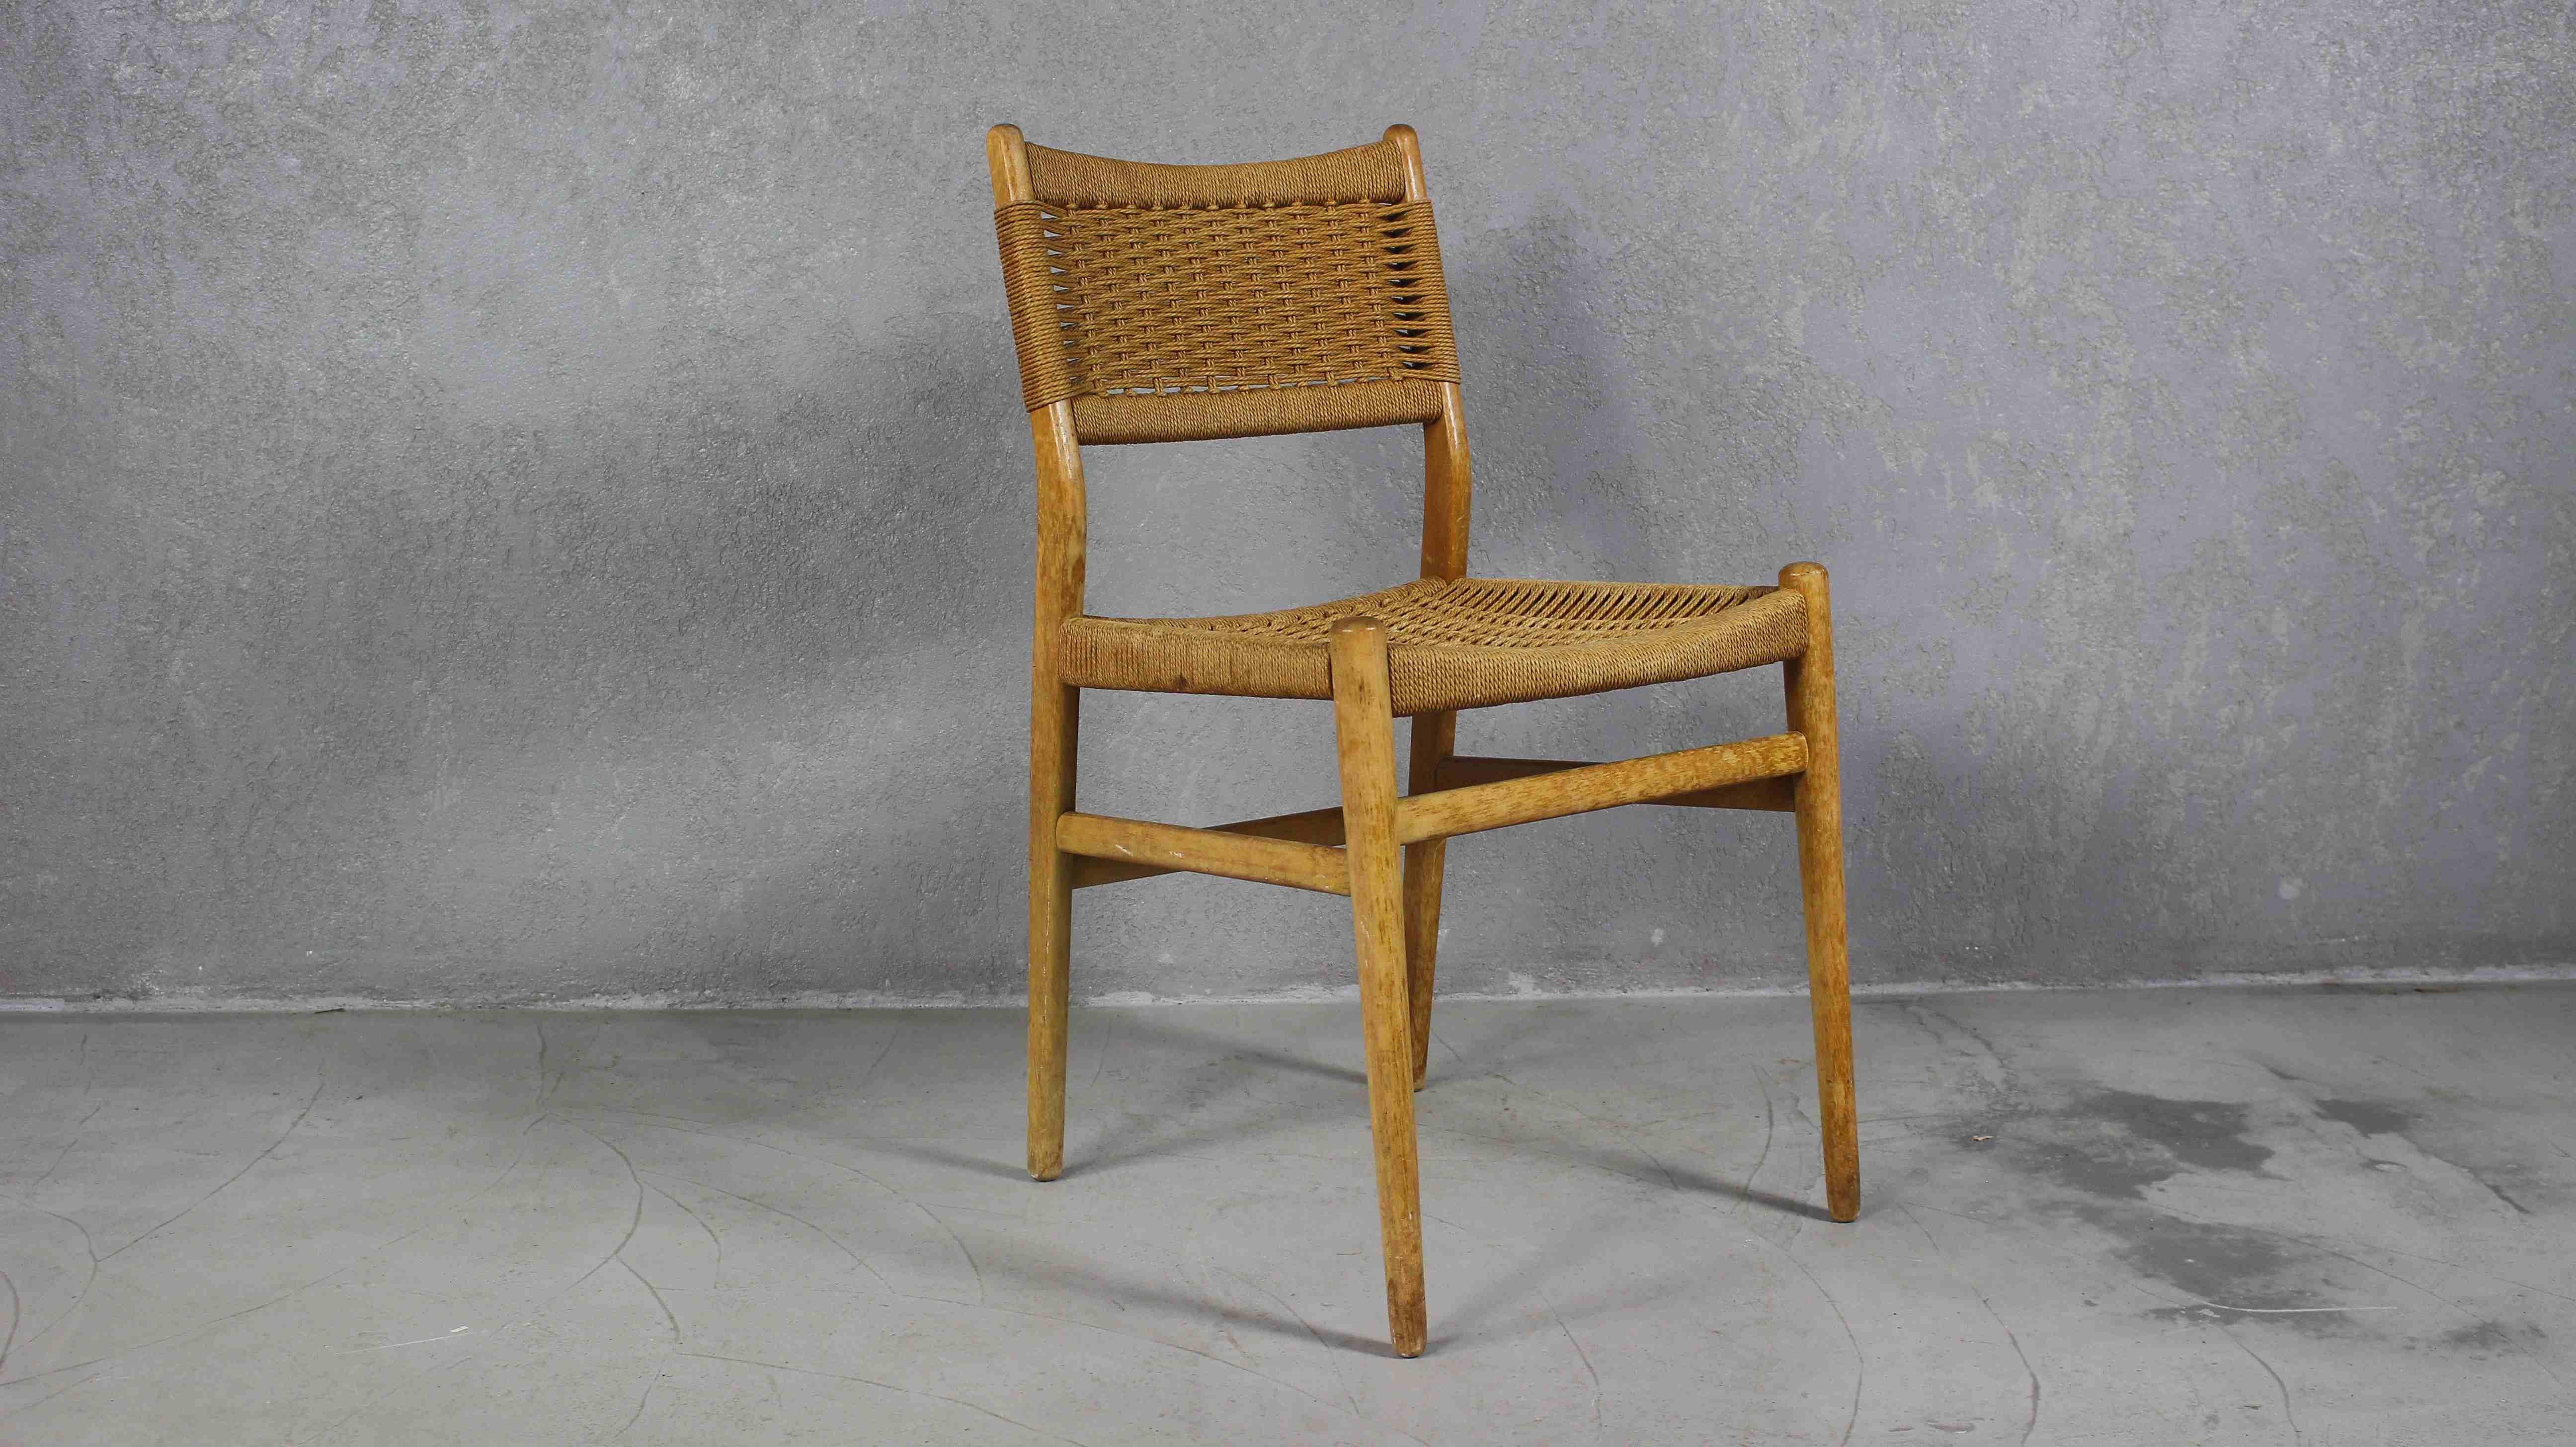 Solid wood frame in oak with woven organic cord seat and back.
Made in Denmark in 1960s.